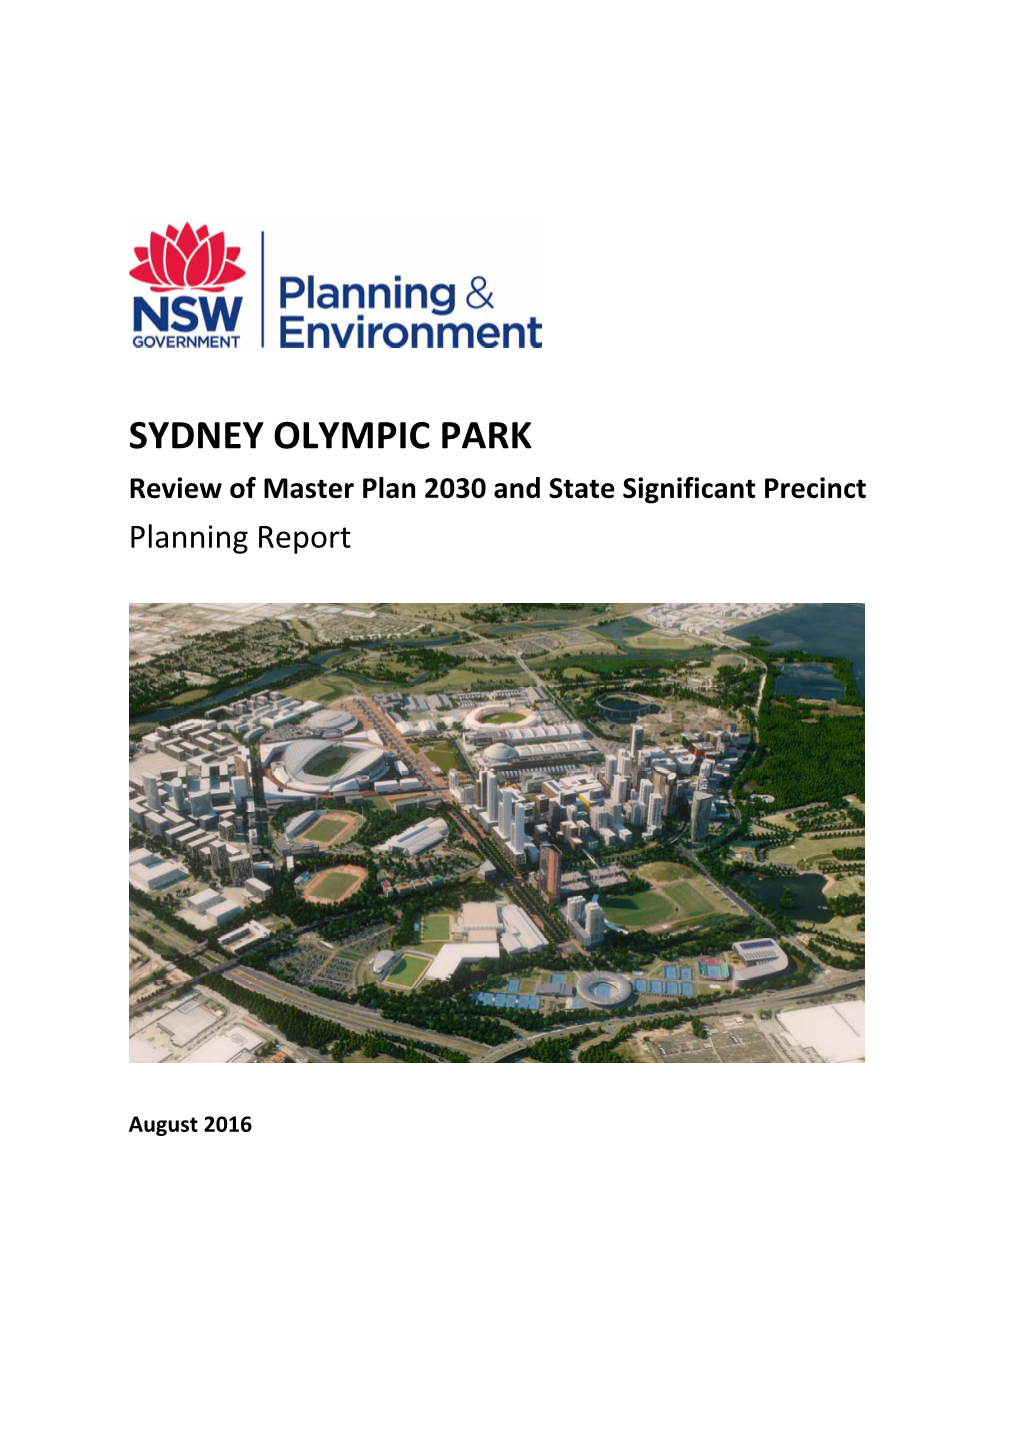 SYDNEY OLYMPIC PARK Review of Master Plan 2030 and State Significant Precinct Planning Report